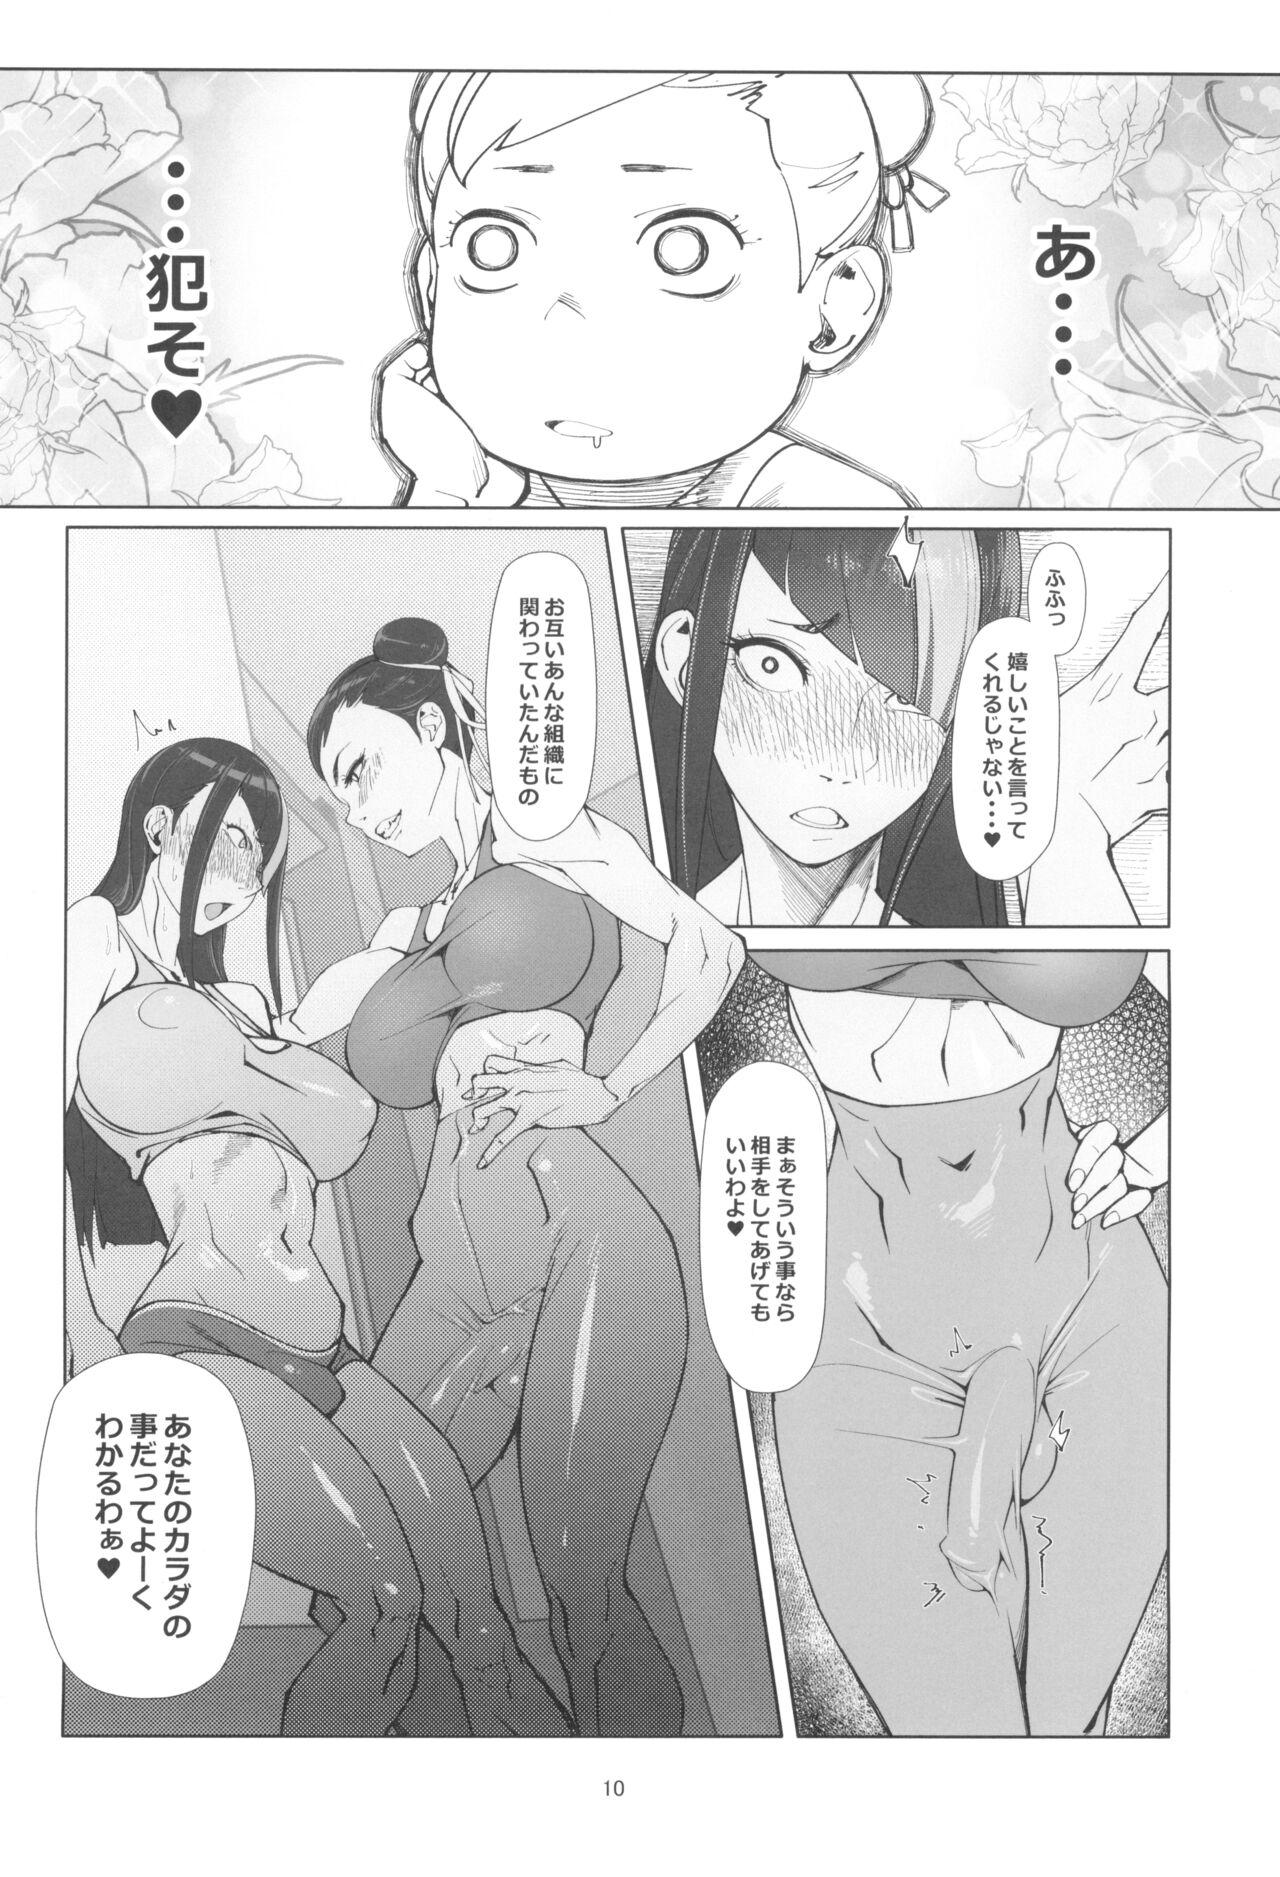 Moaning Backstab - Street fighter Mediumtits - Page 10